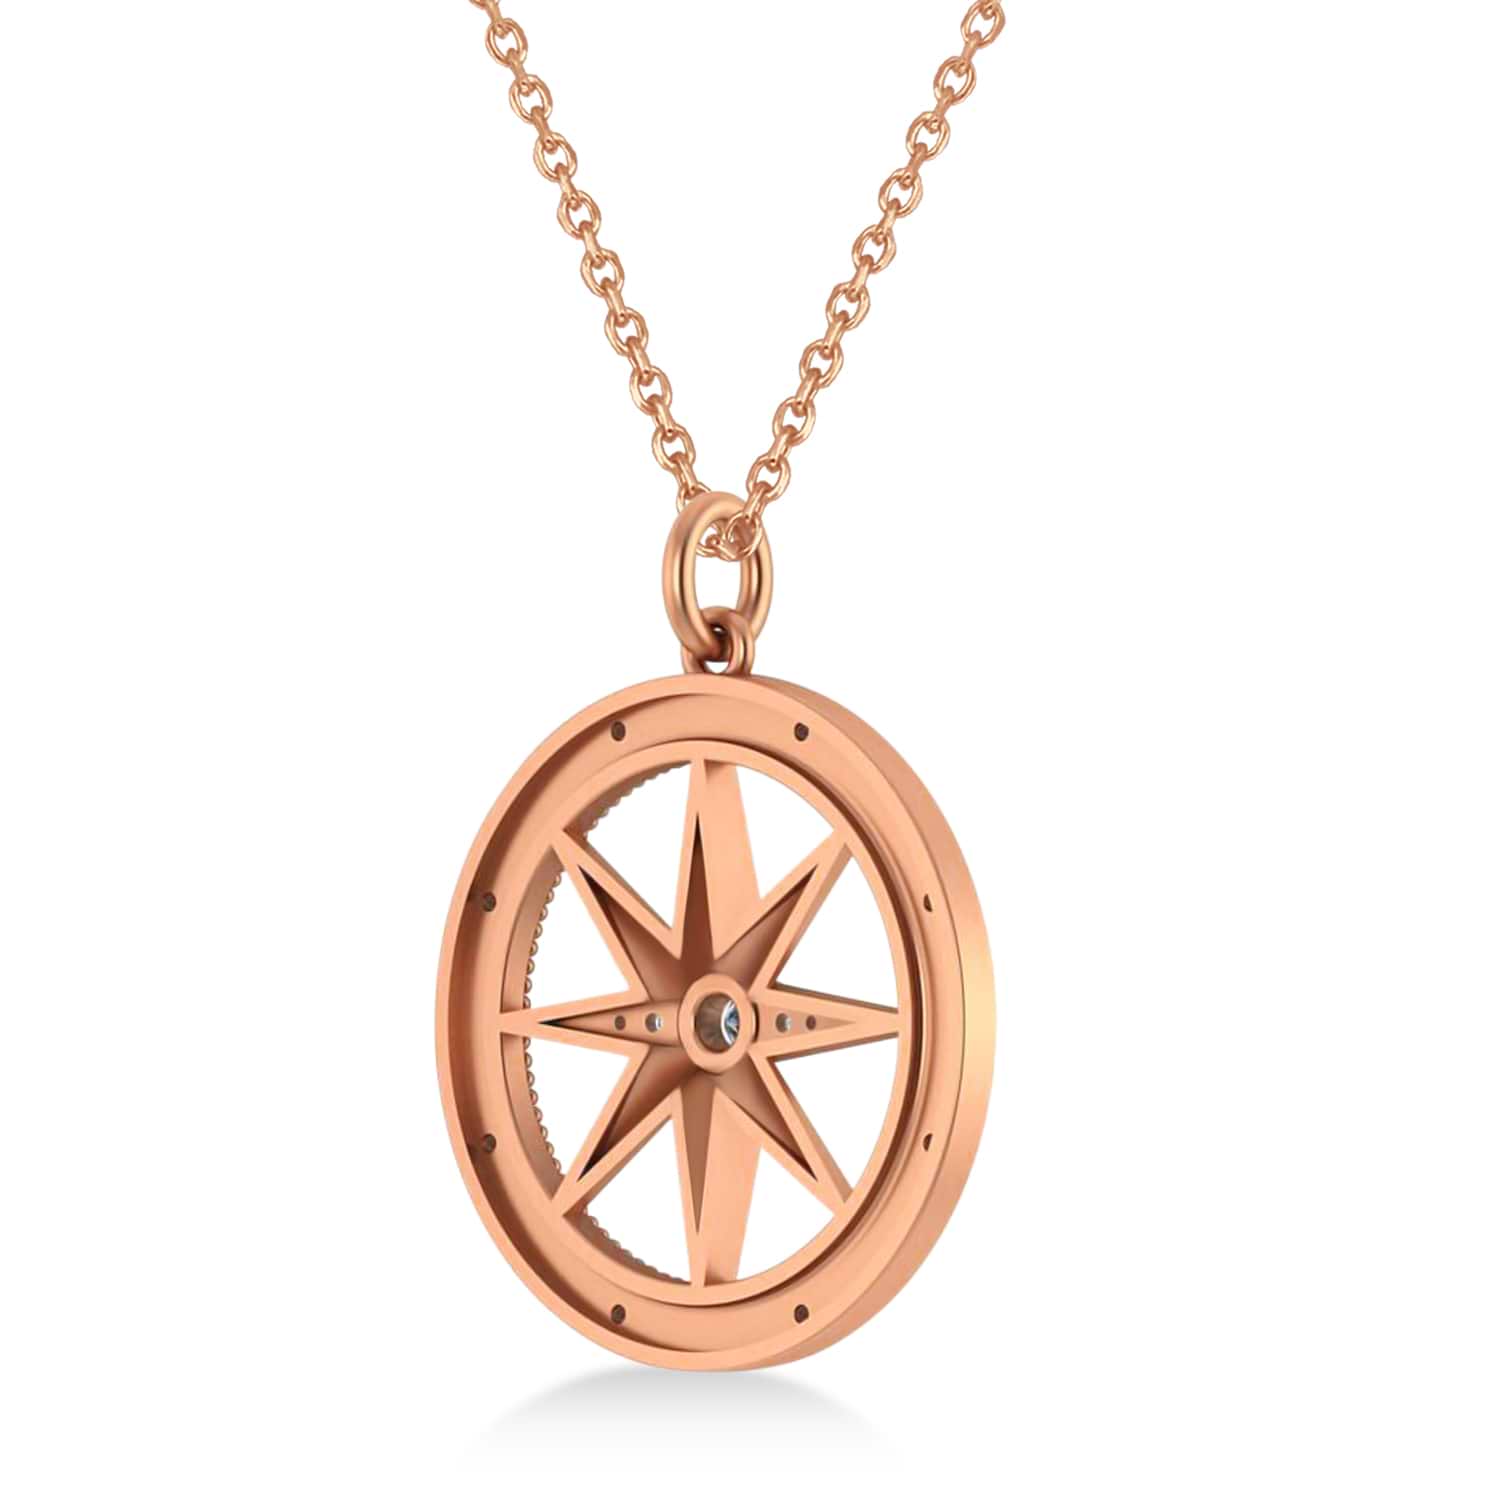 Large Compass Necklace Pendant For Men Diamond Accented 14kRose Gold (0.38ct)